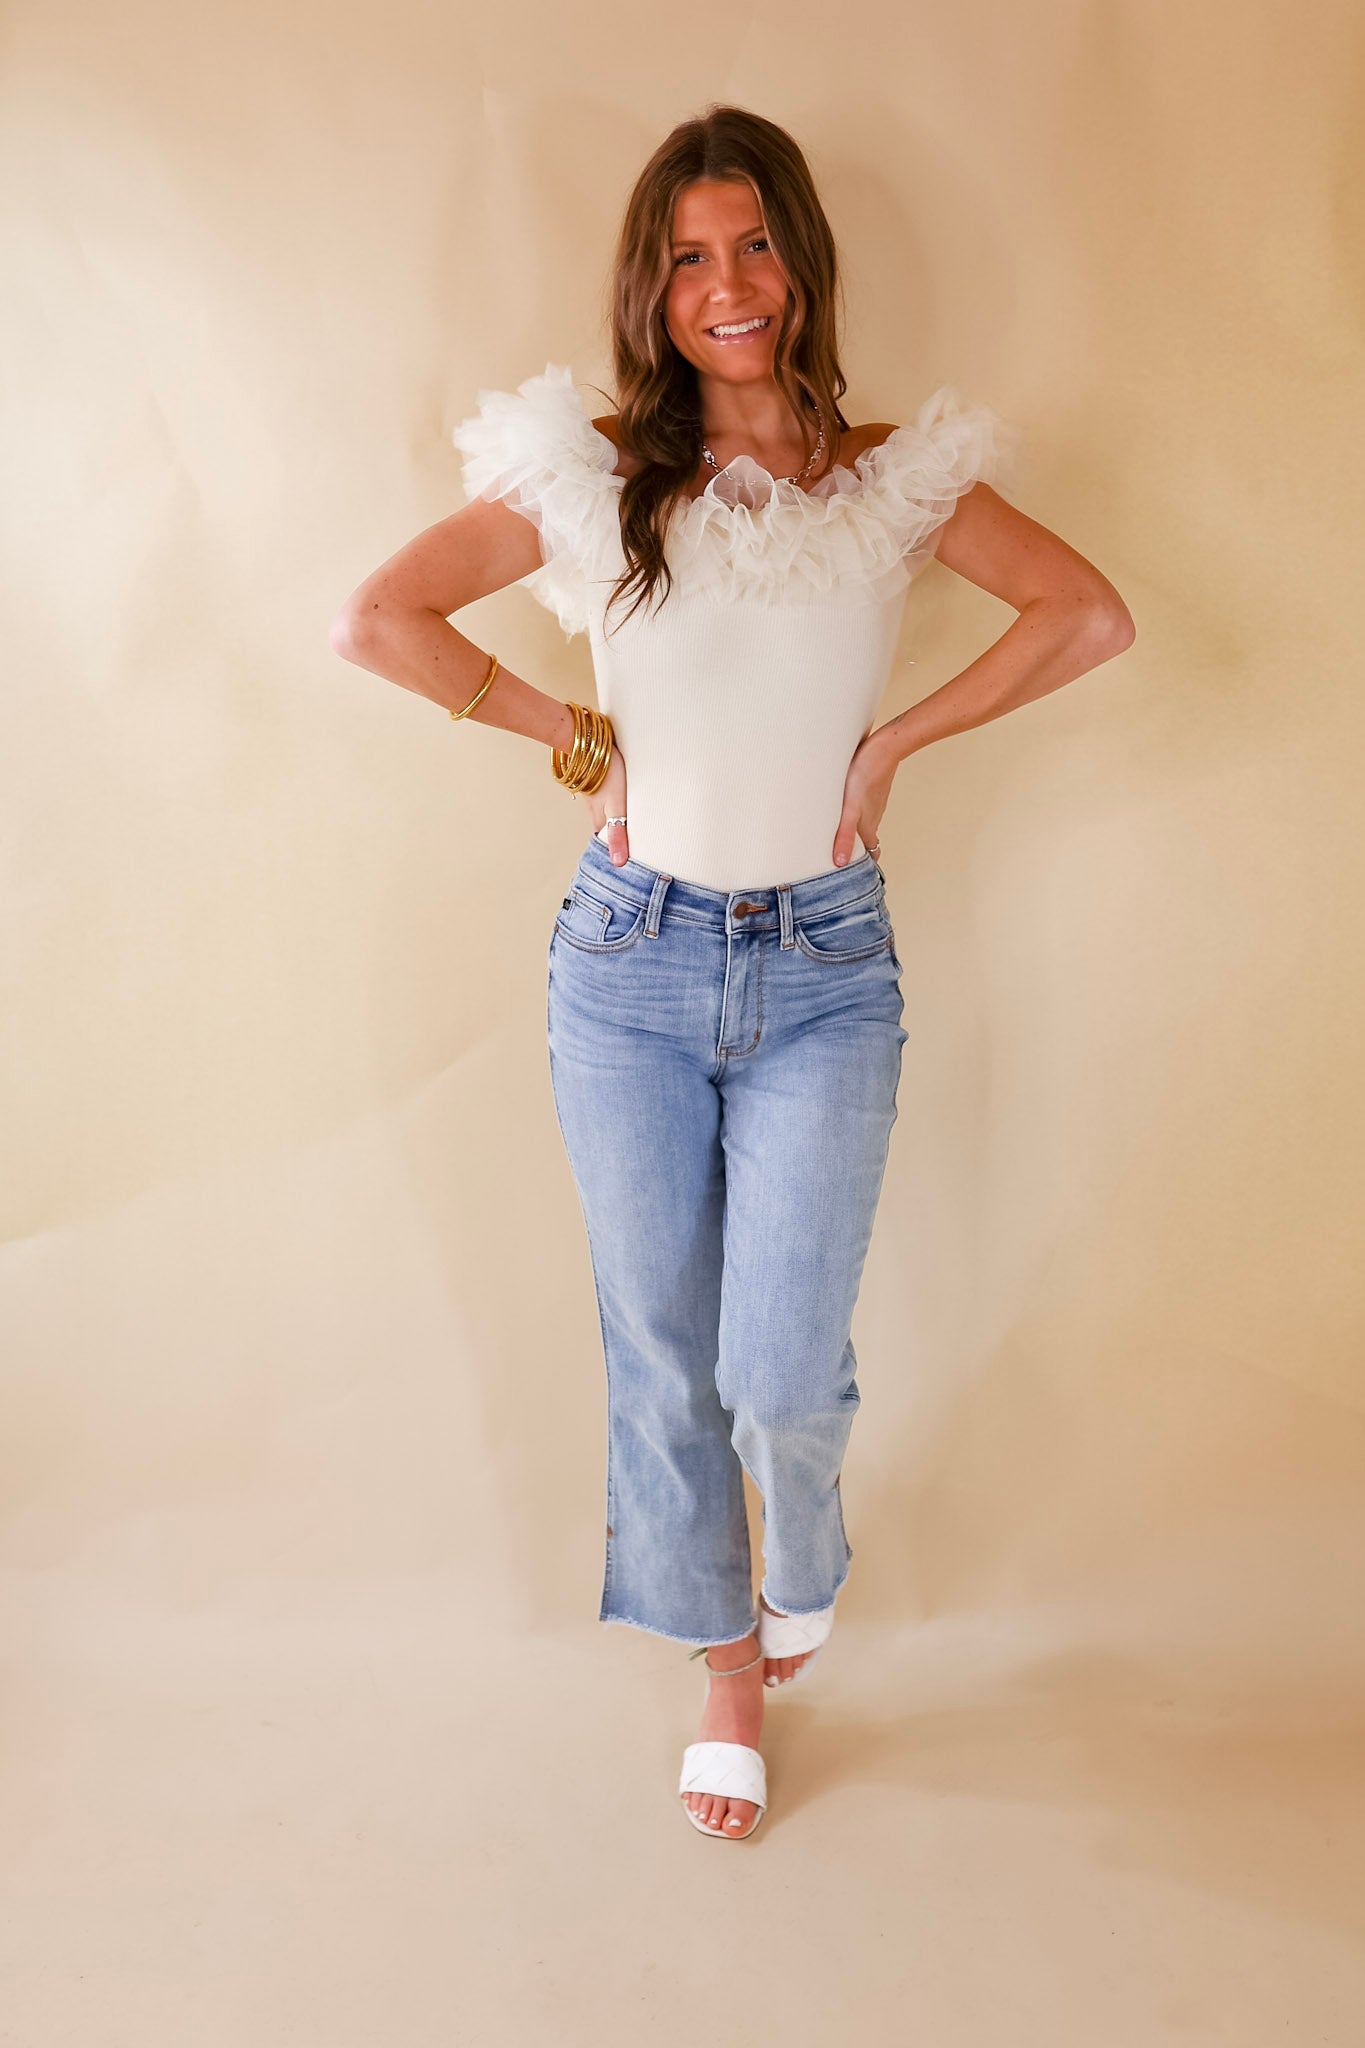 Pose For The Camera Tulle Upper Bodysuit in Cream - Giddy Up Glamour Boutique